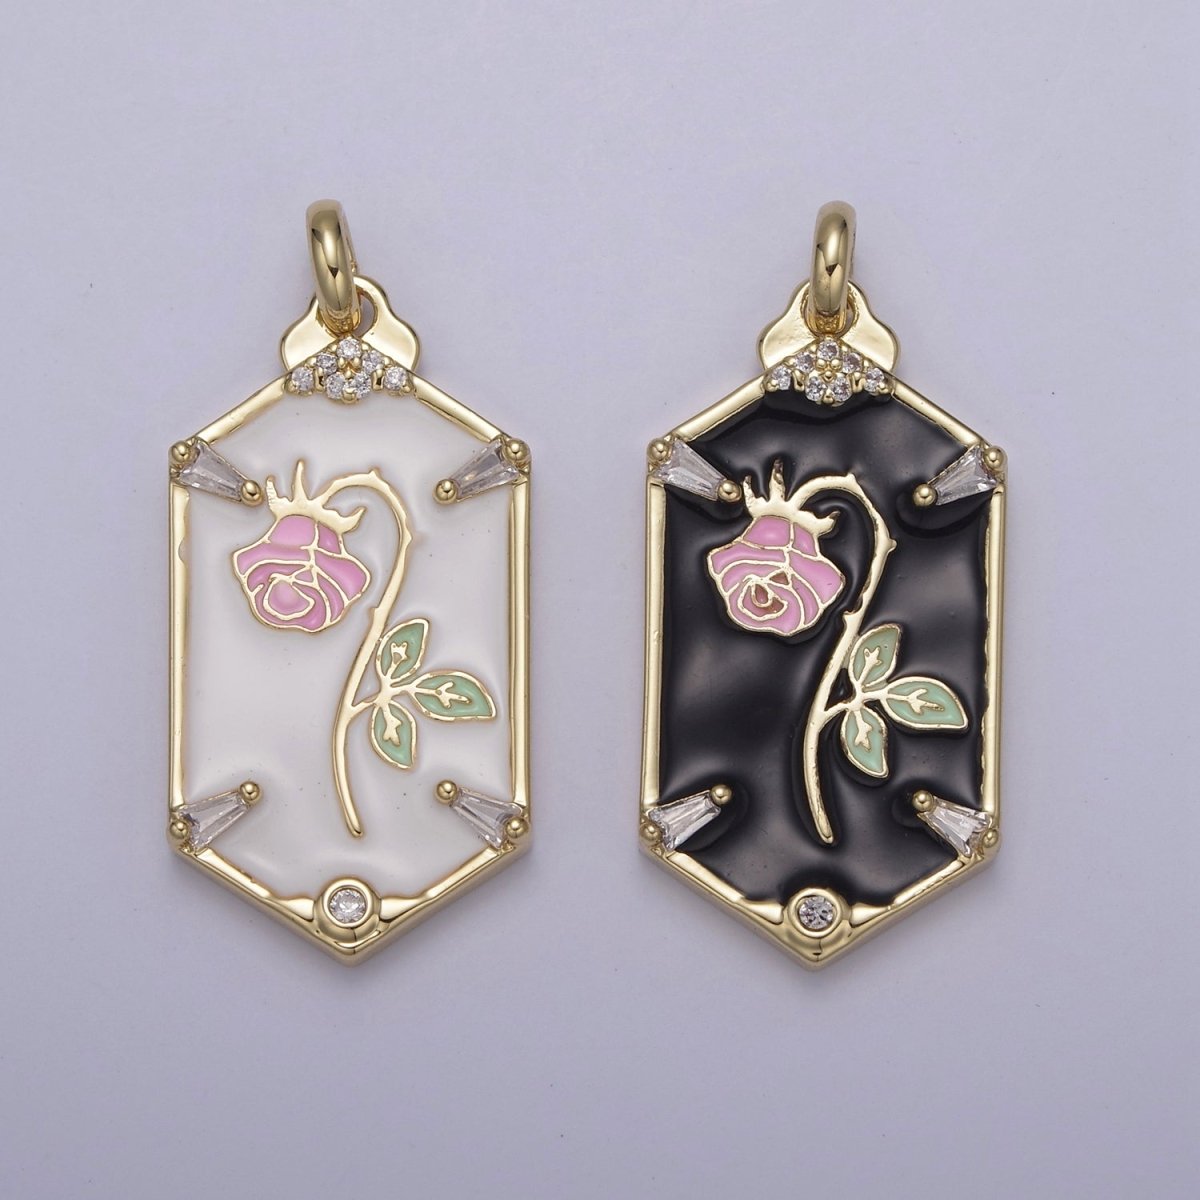 14k Gold Filled Wilted Pink Rose Charm White black Enamel Flower necklace Pendant Belle Beauty and the Beast Floral Bracelet Hexagon Tag Charm N-760 N-762 - DLUXCA